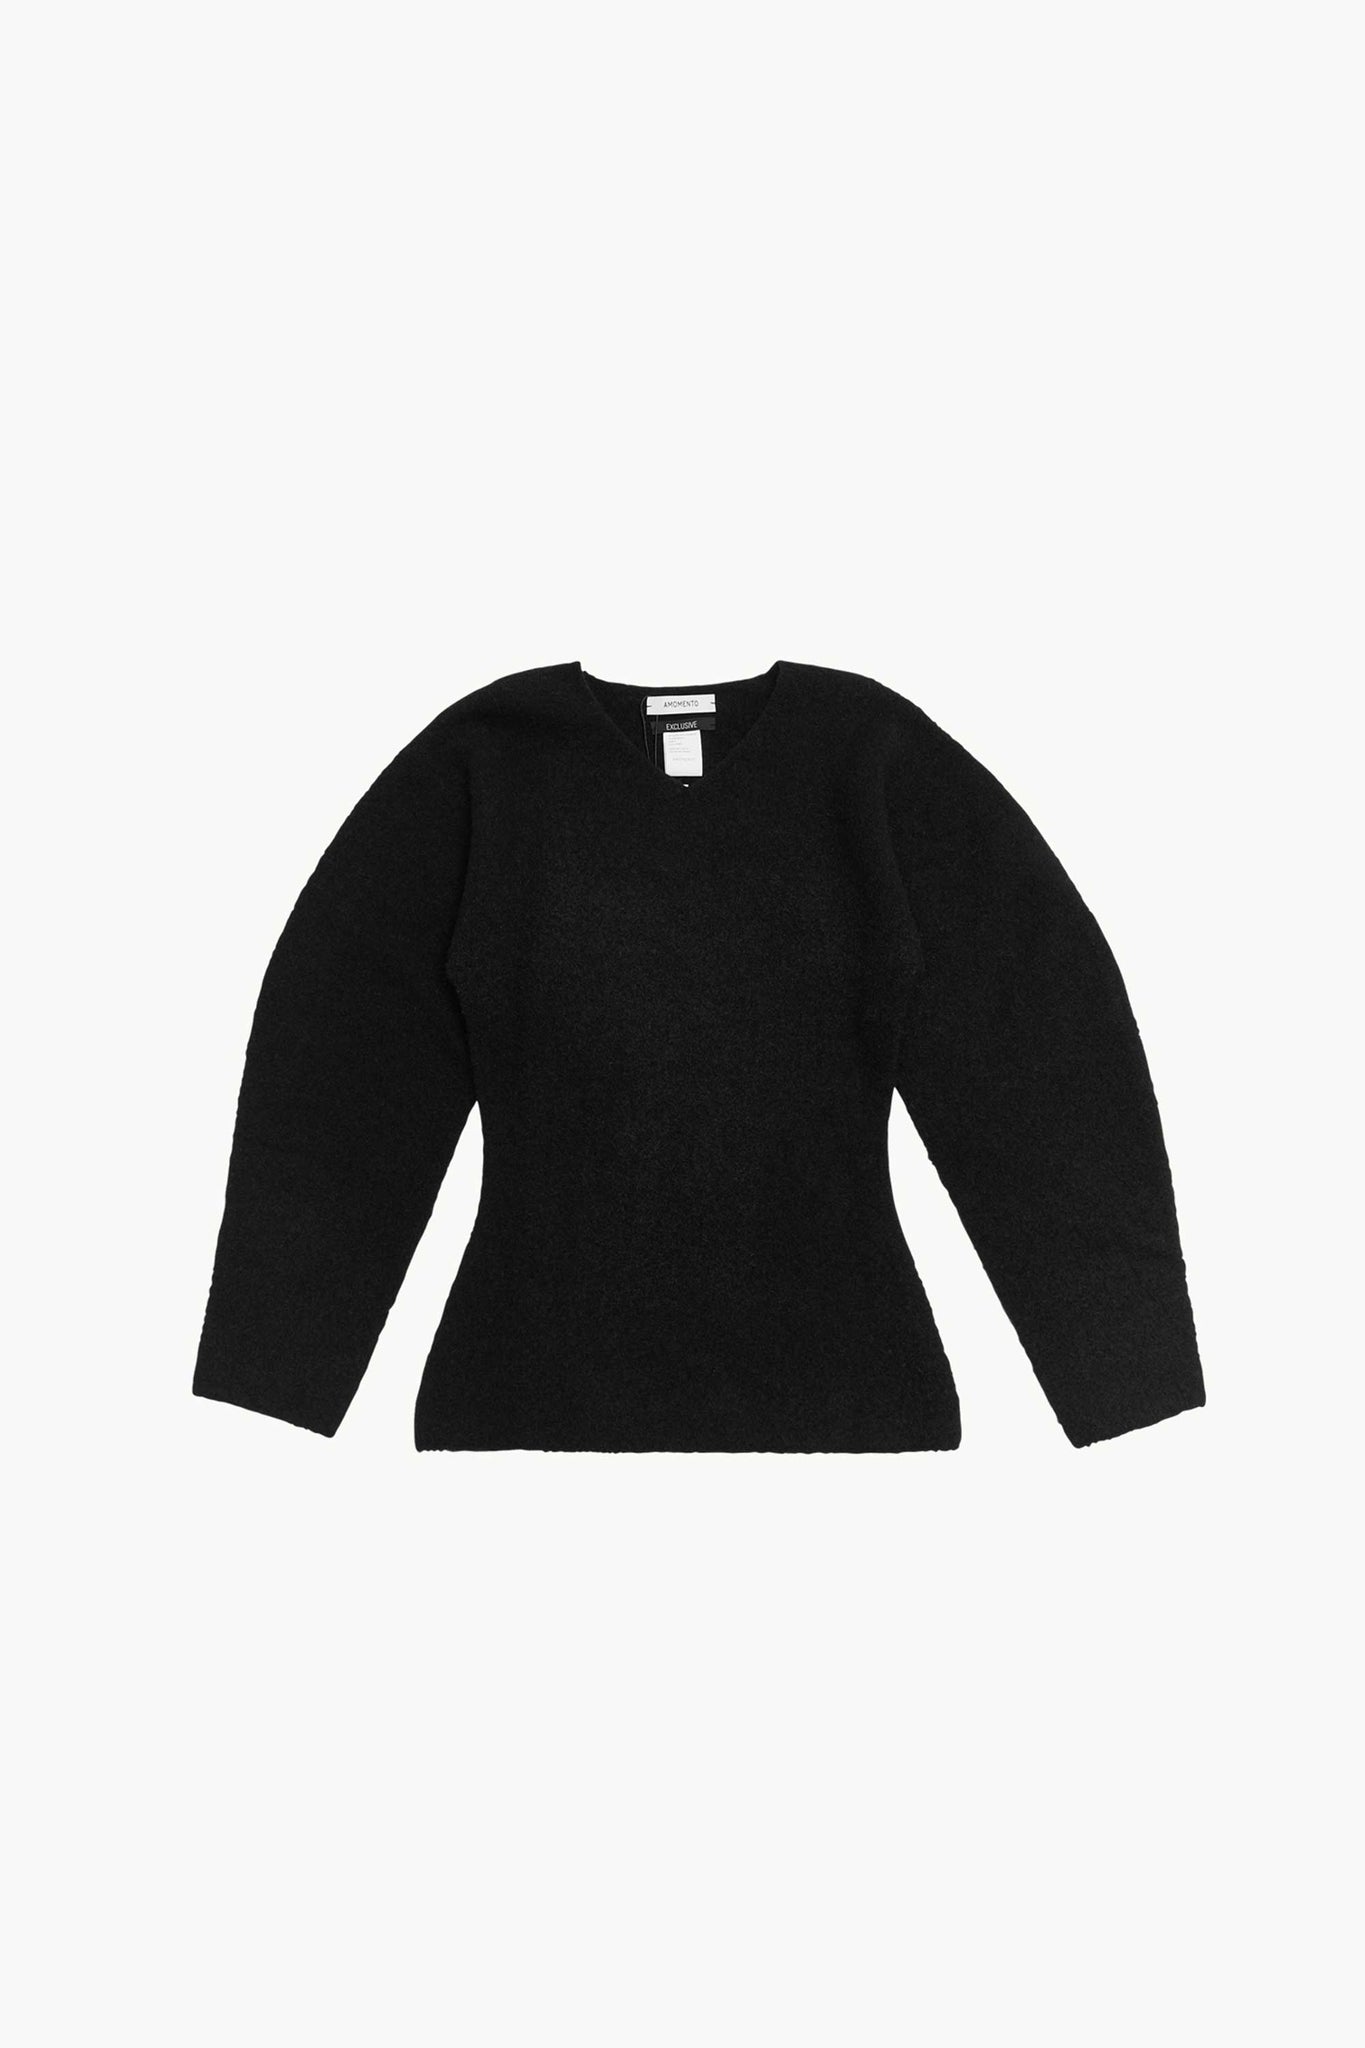 AMOMENTO HOURGLASS WHOLE GARMENT KNIT TOP [EXCLUSIVE]